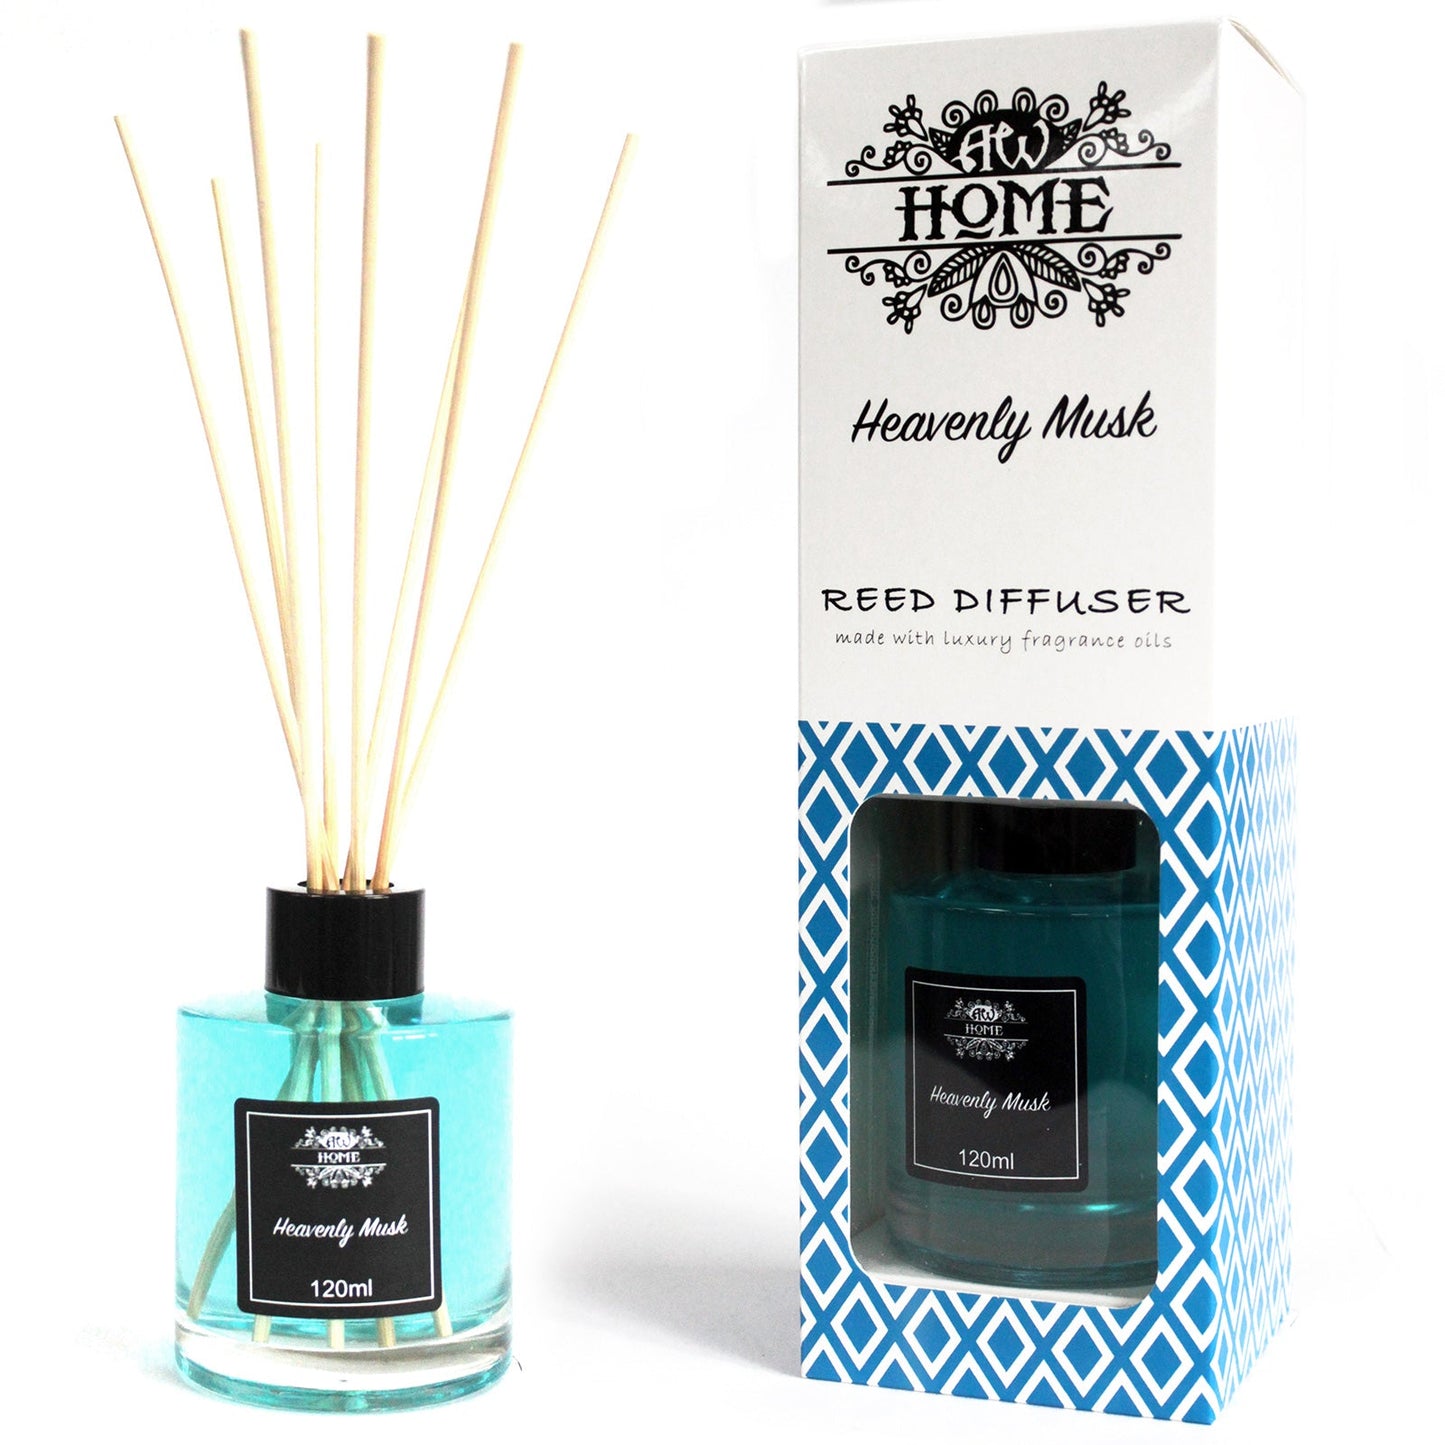 Home Fragrance Reed Diffuser - Various Fragrances - 120ml Home Fragrance Reed Diffusers - 120ml Soul Inspired Heavenly Musk 